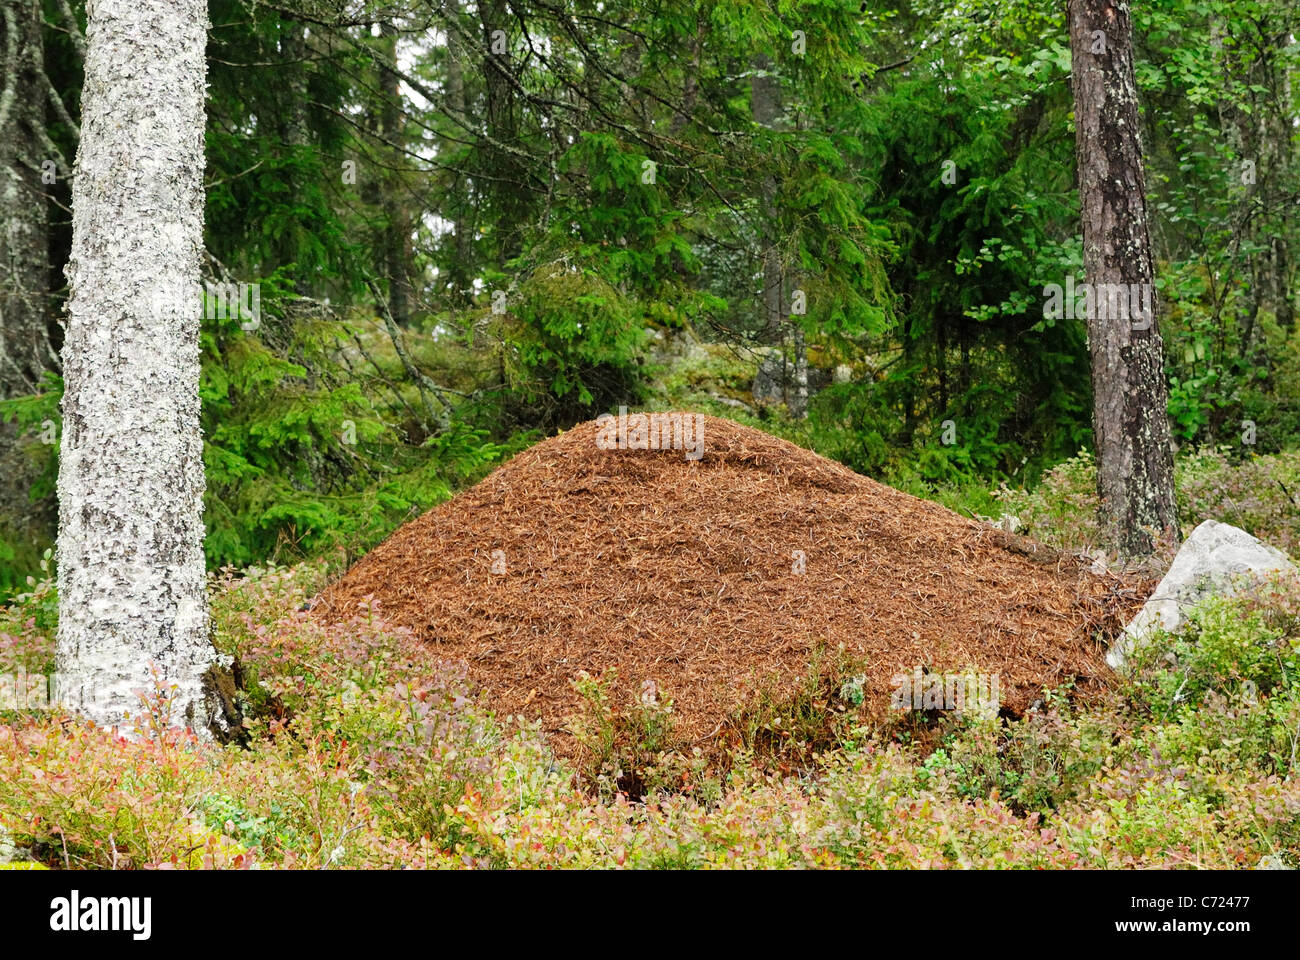 Enormous Wood Ant nest (Formica rufa) in a Swedish forest Stock Photo